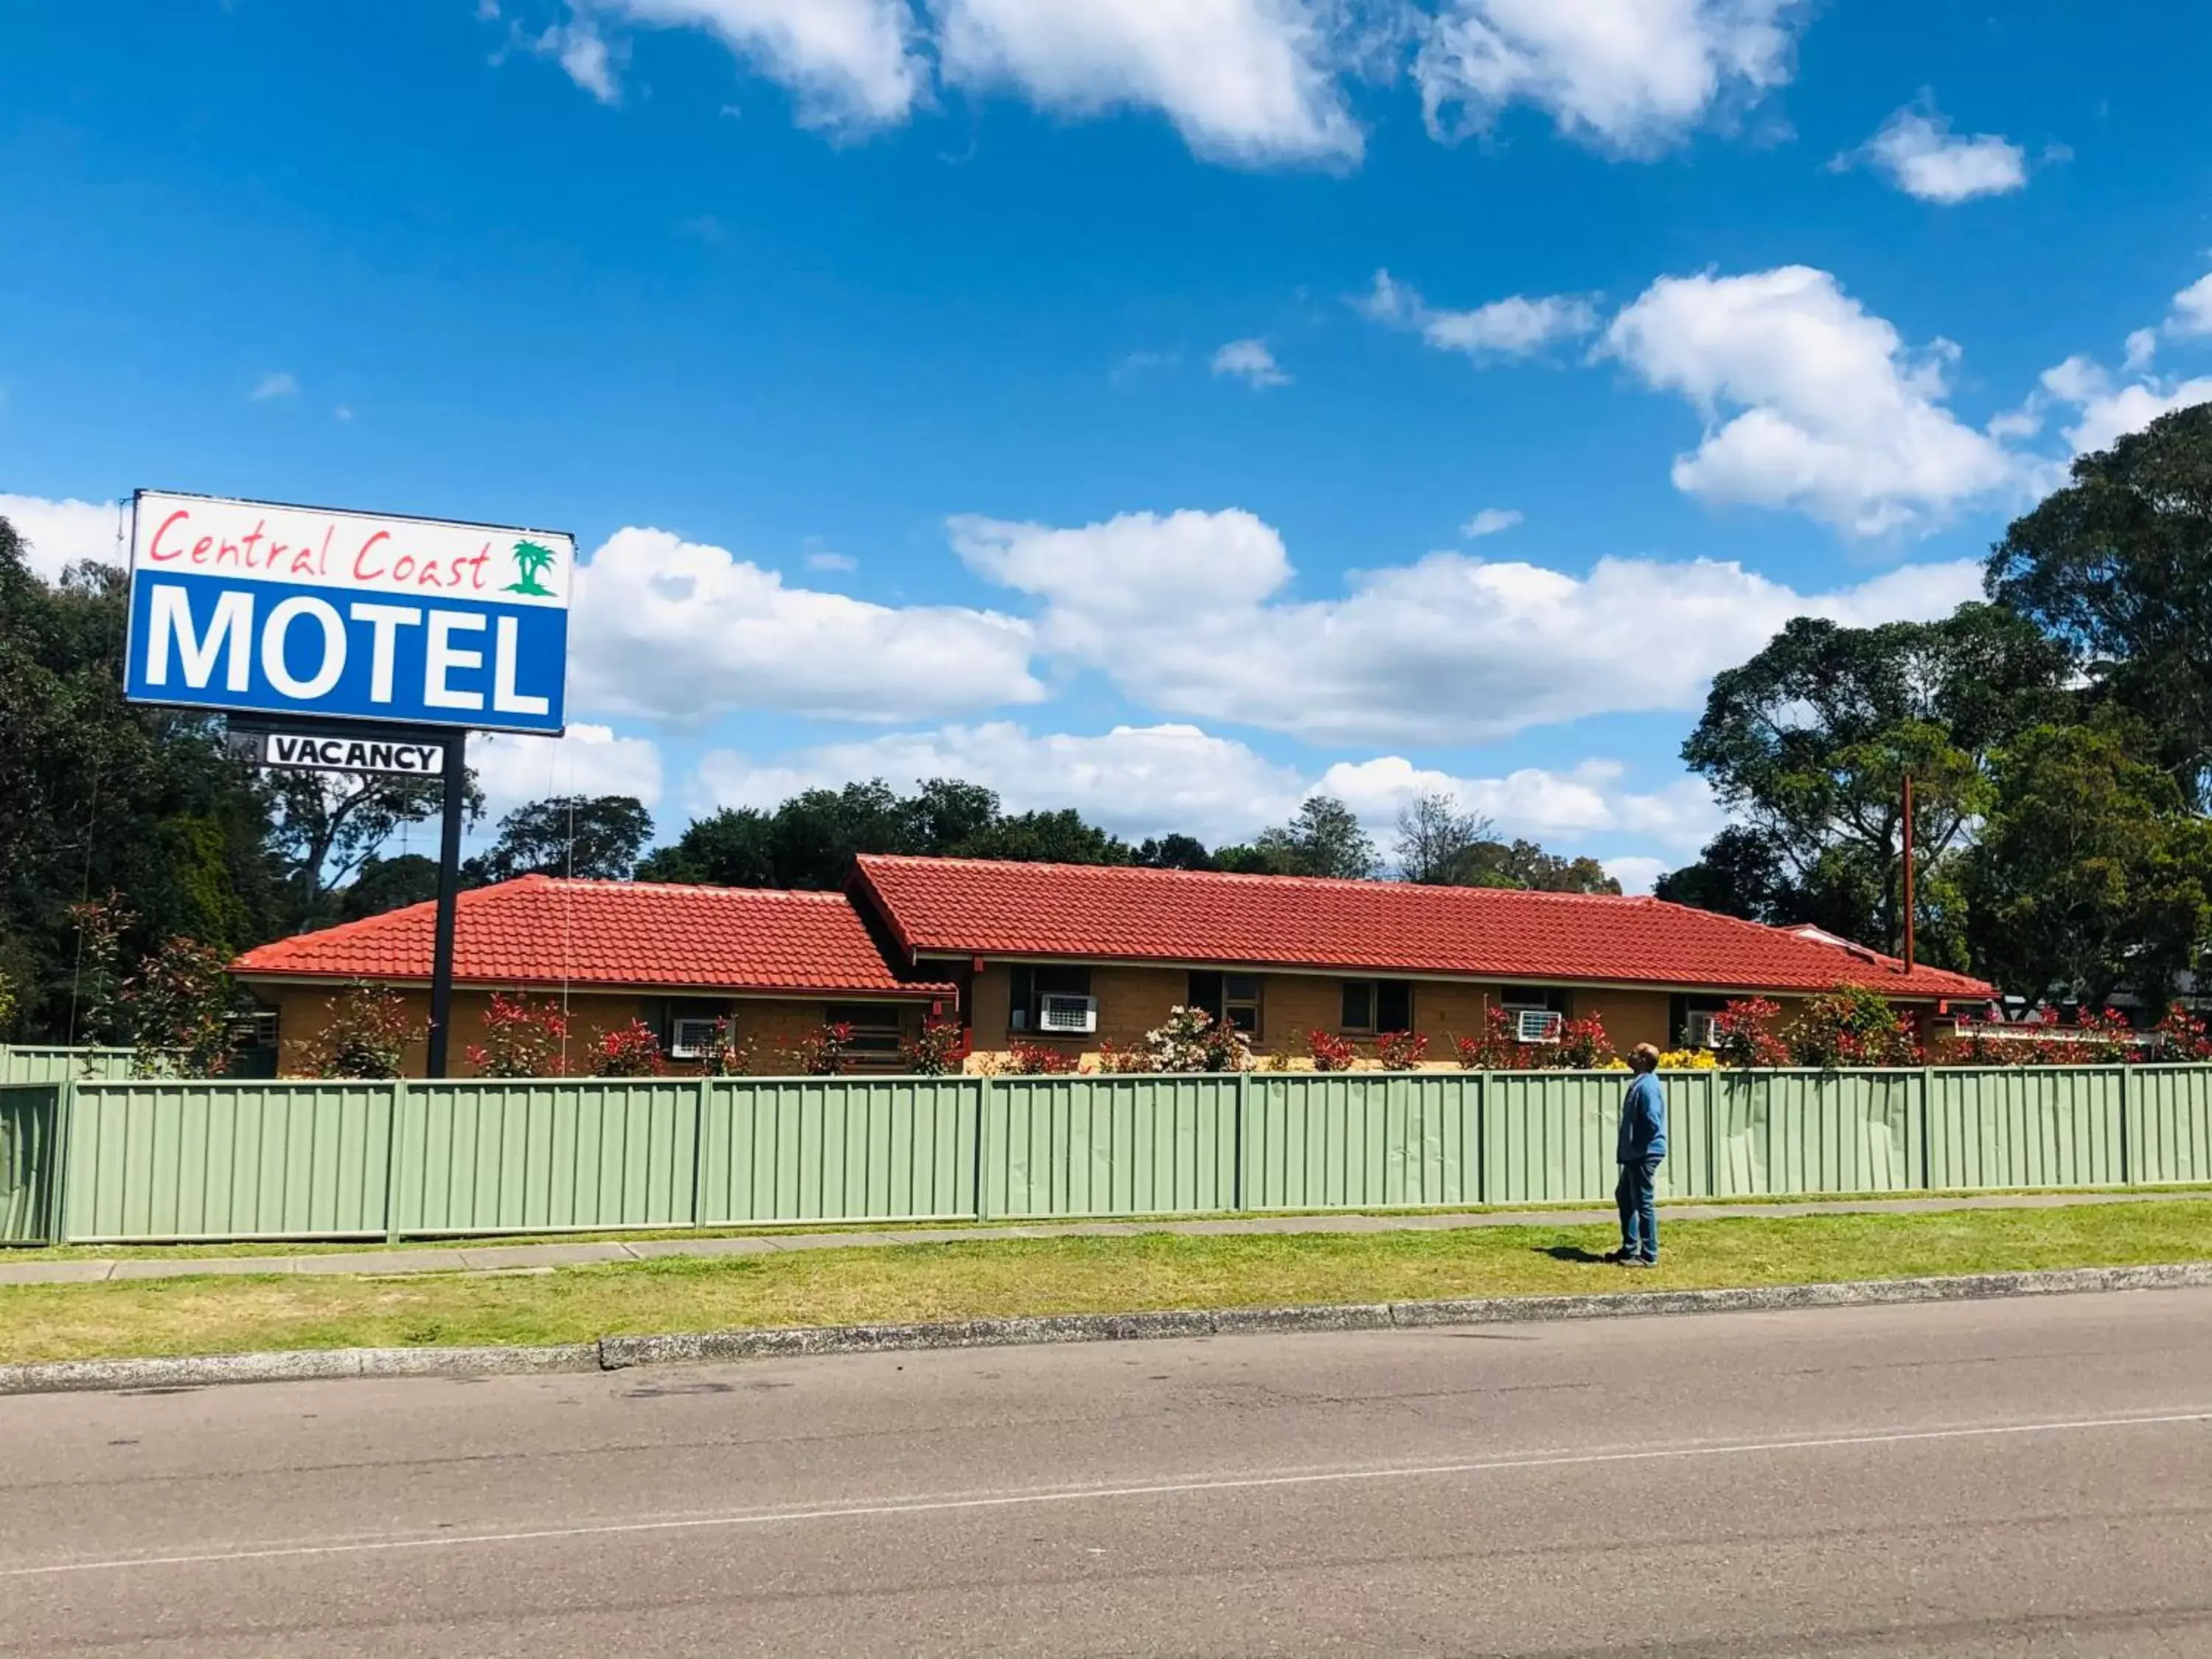 Property Building in Central Coast Motel